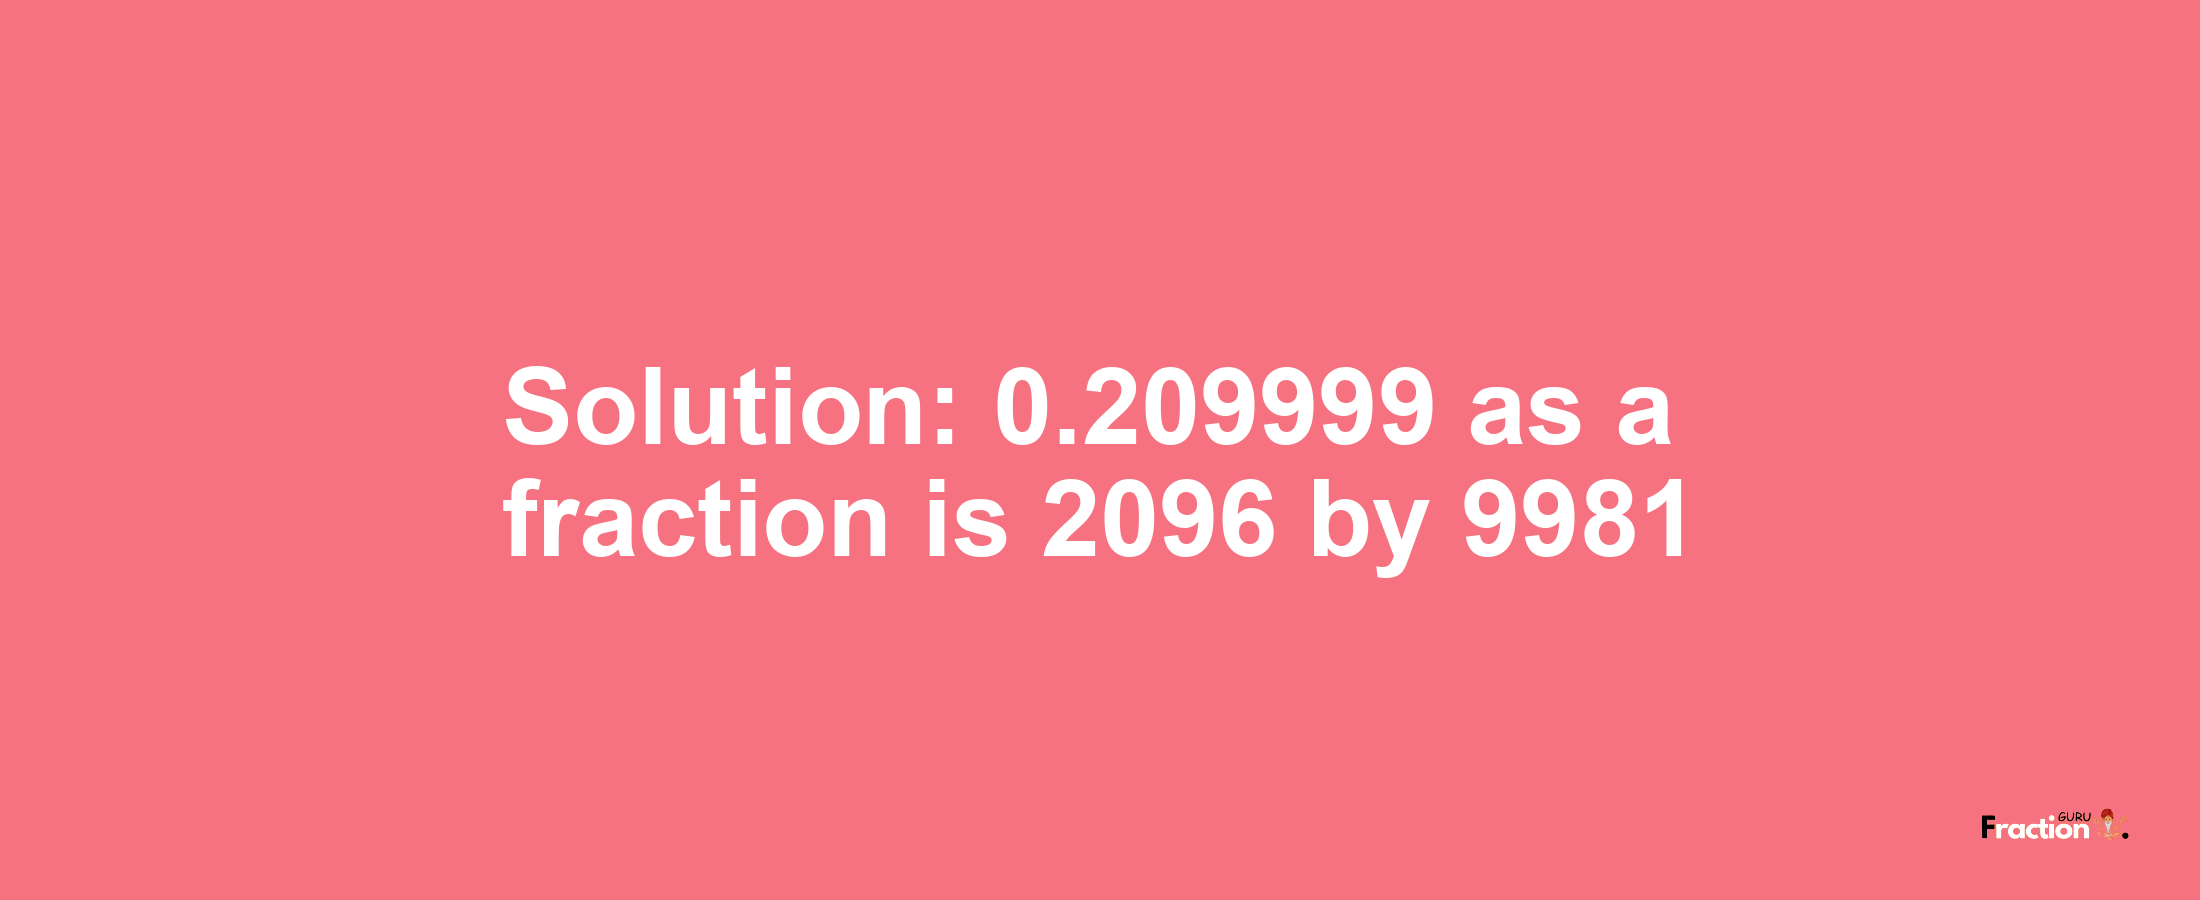 Solution:0.209999 as a fraction is 2096/9981